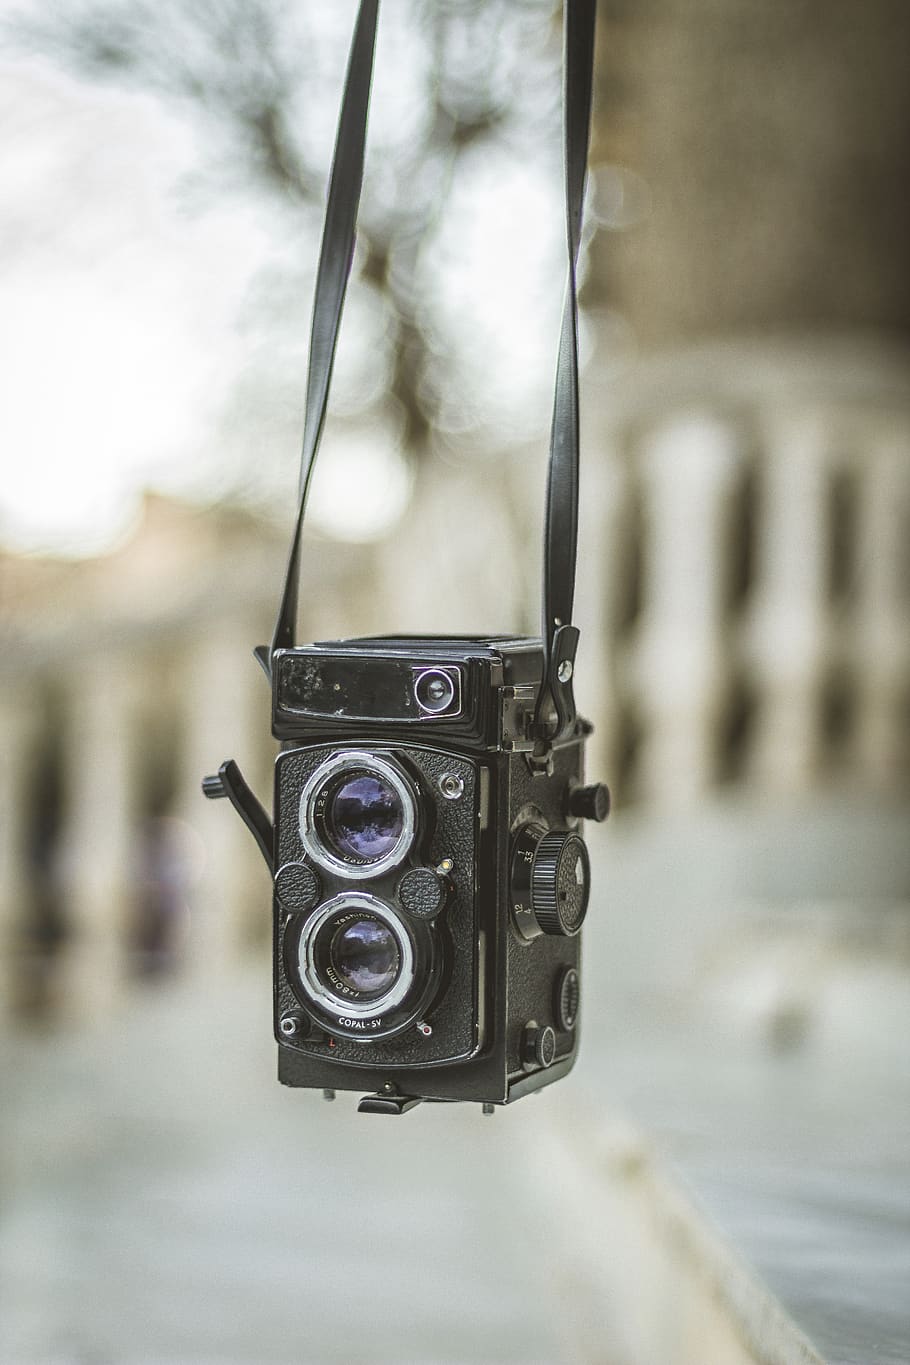 selected focus photography of vintage black camera, electronics